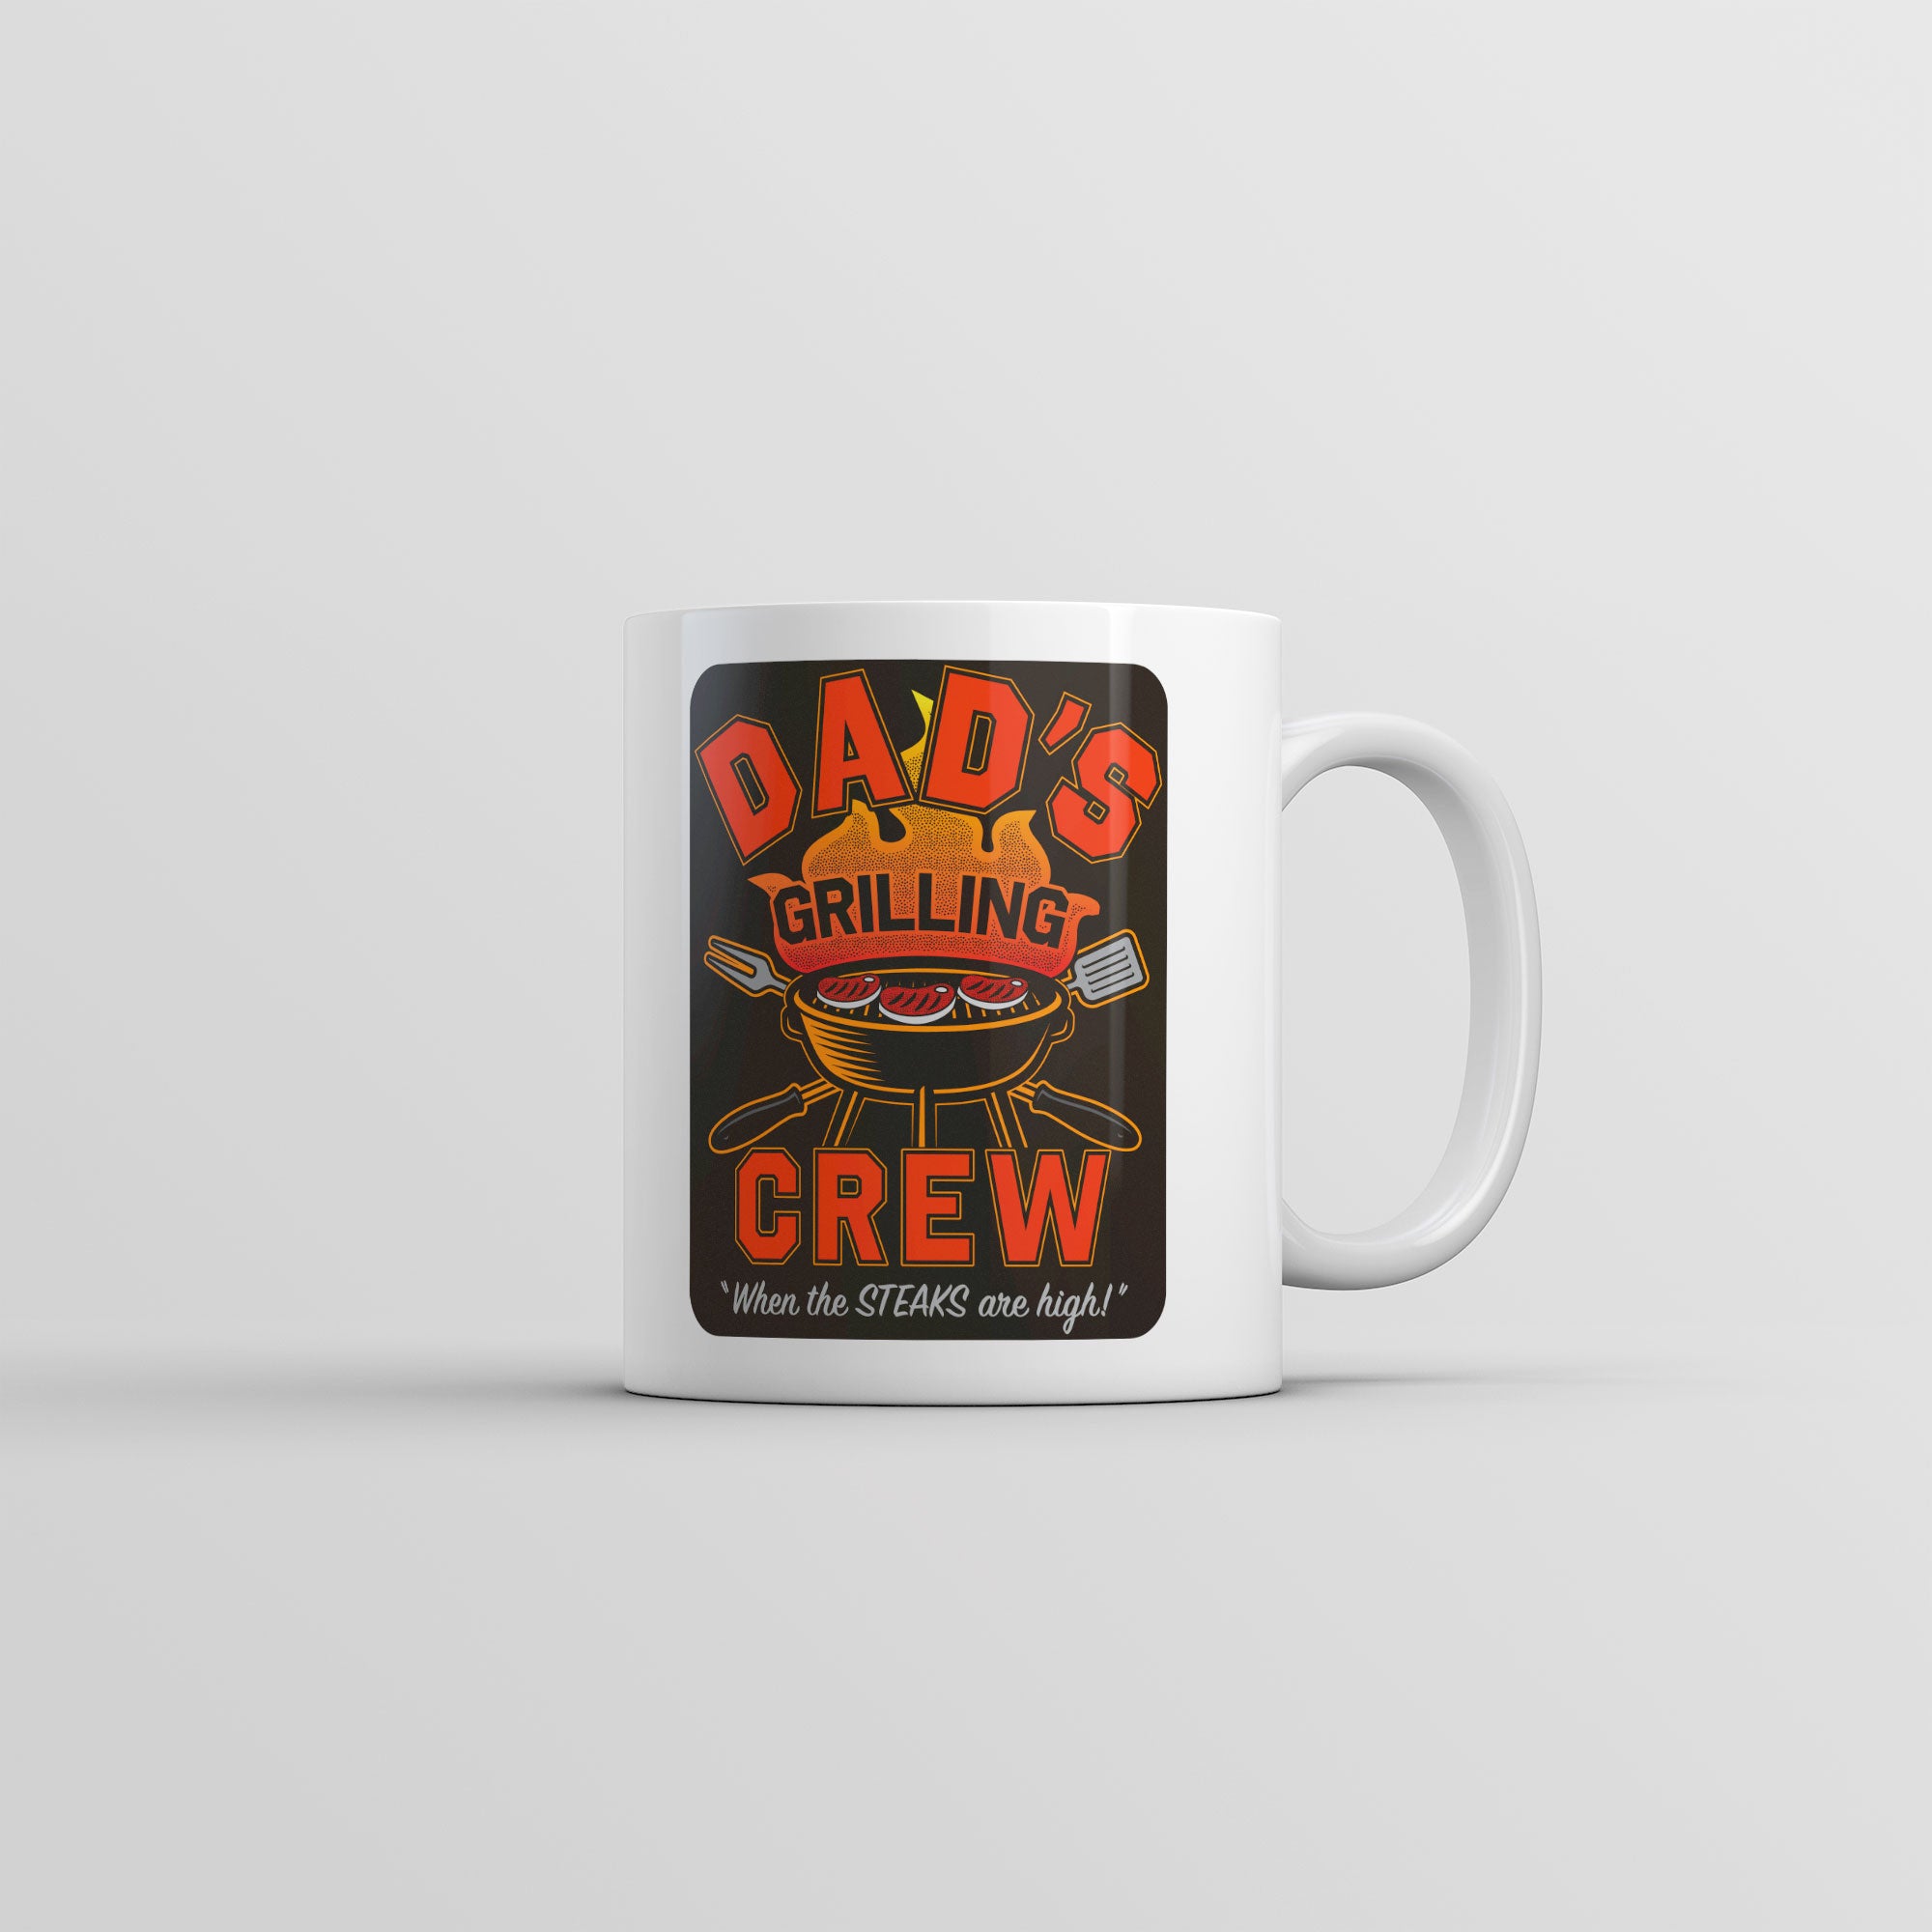 Funny White Dads Grilling Crew Coffee Mug Nerdy Father's Day Food Tee